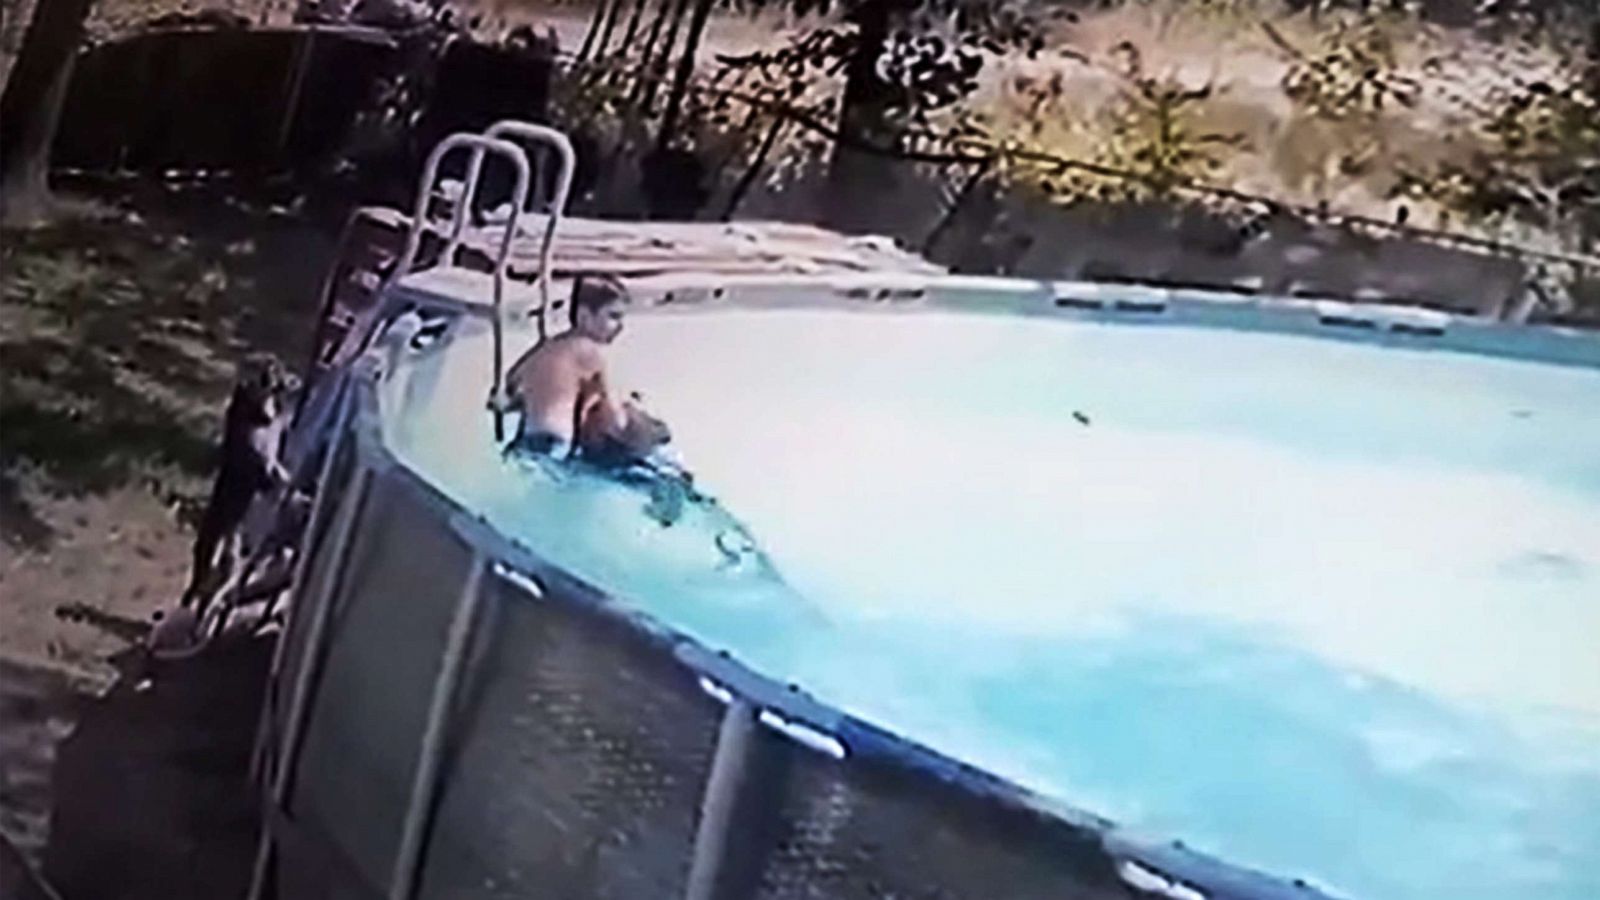 A 10-year-old Boy Saves Drowning Mother Suffering Seizure In Pool